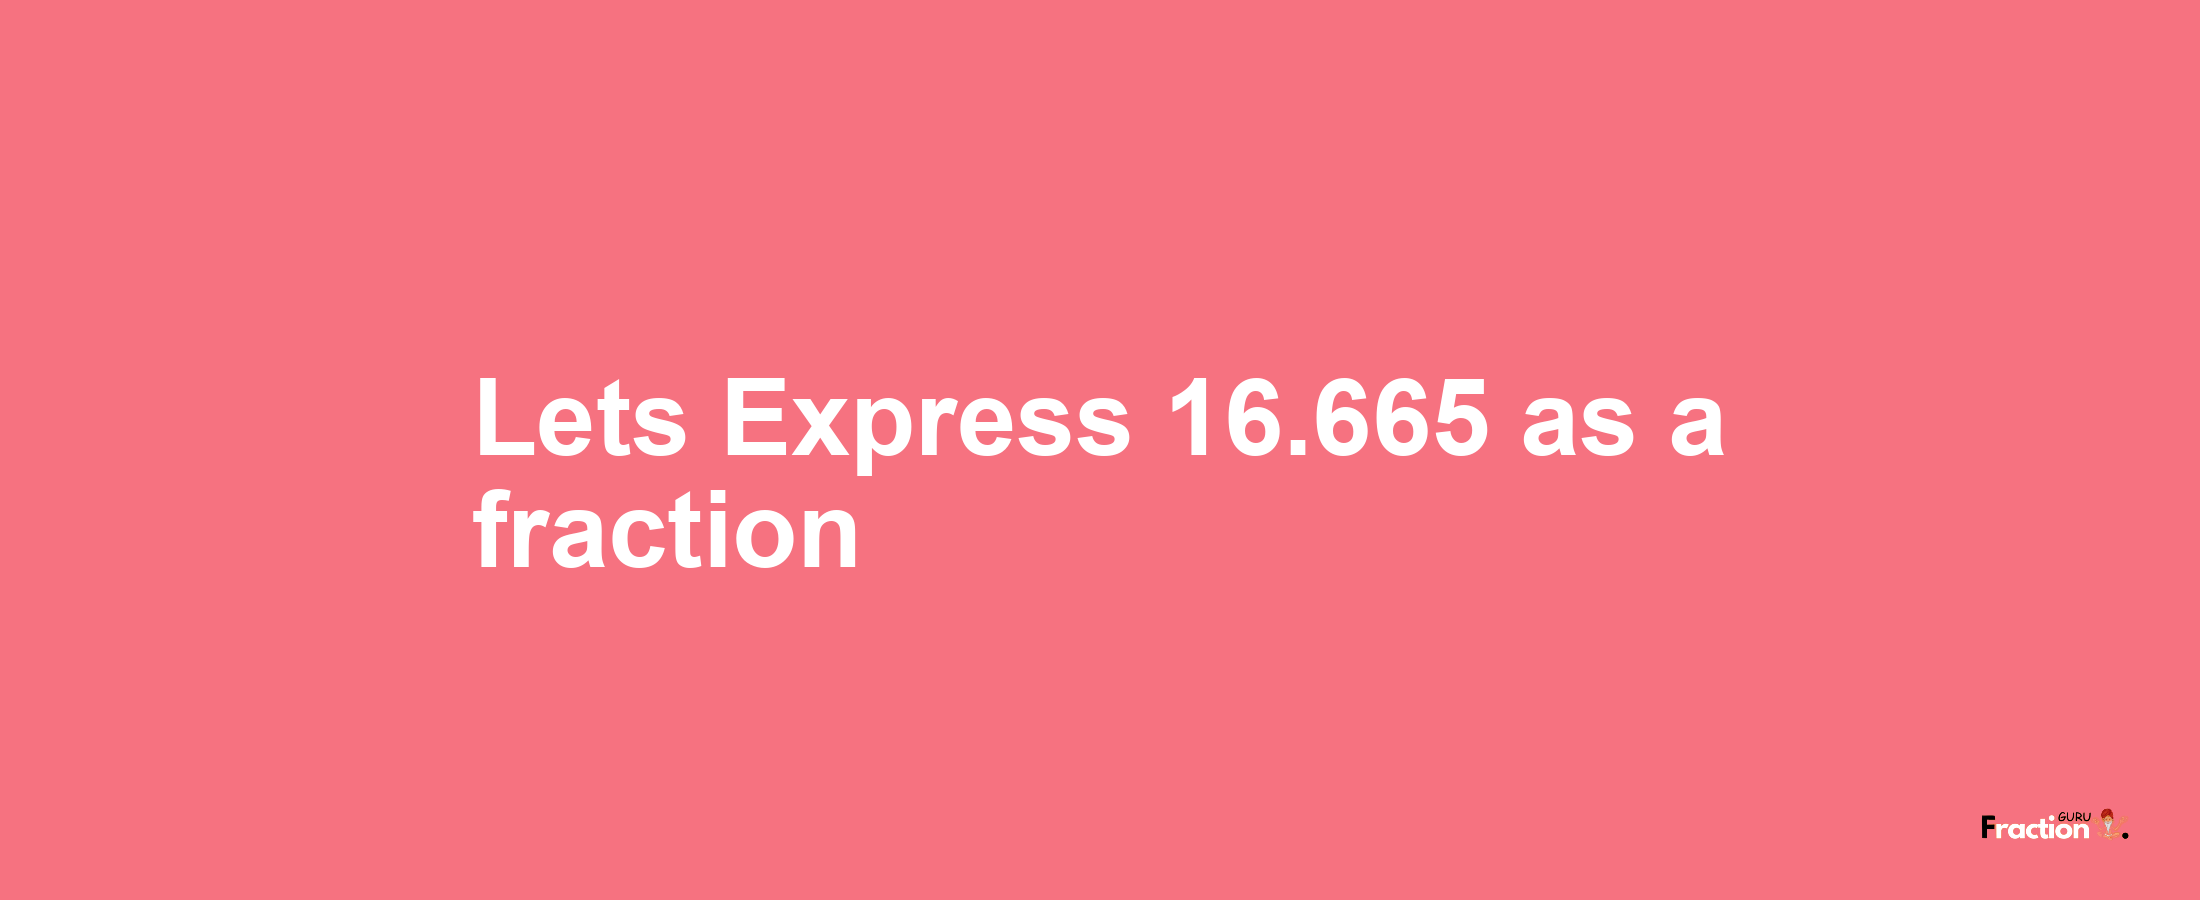 Lets Express 16.665 as afraction